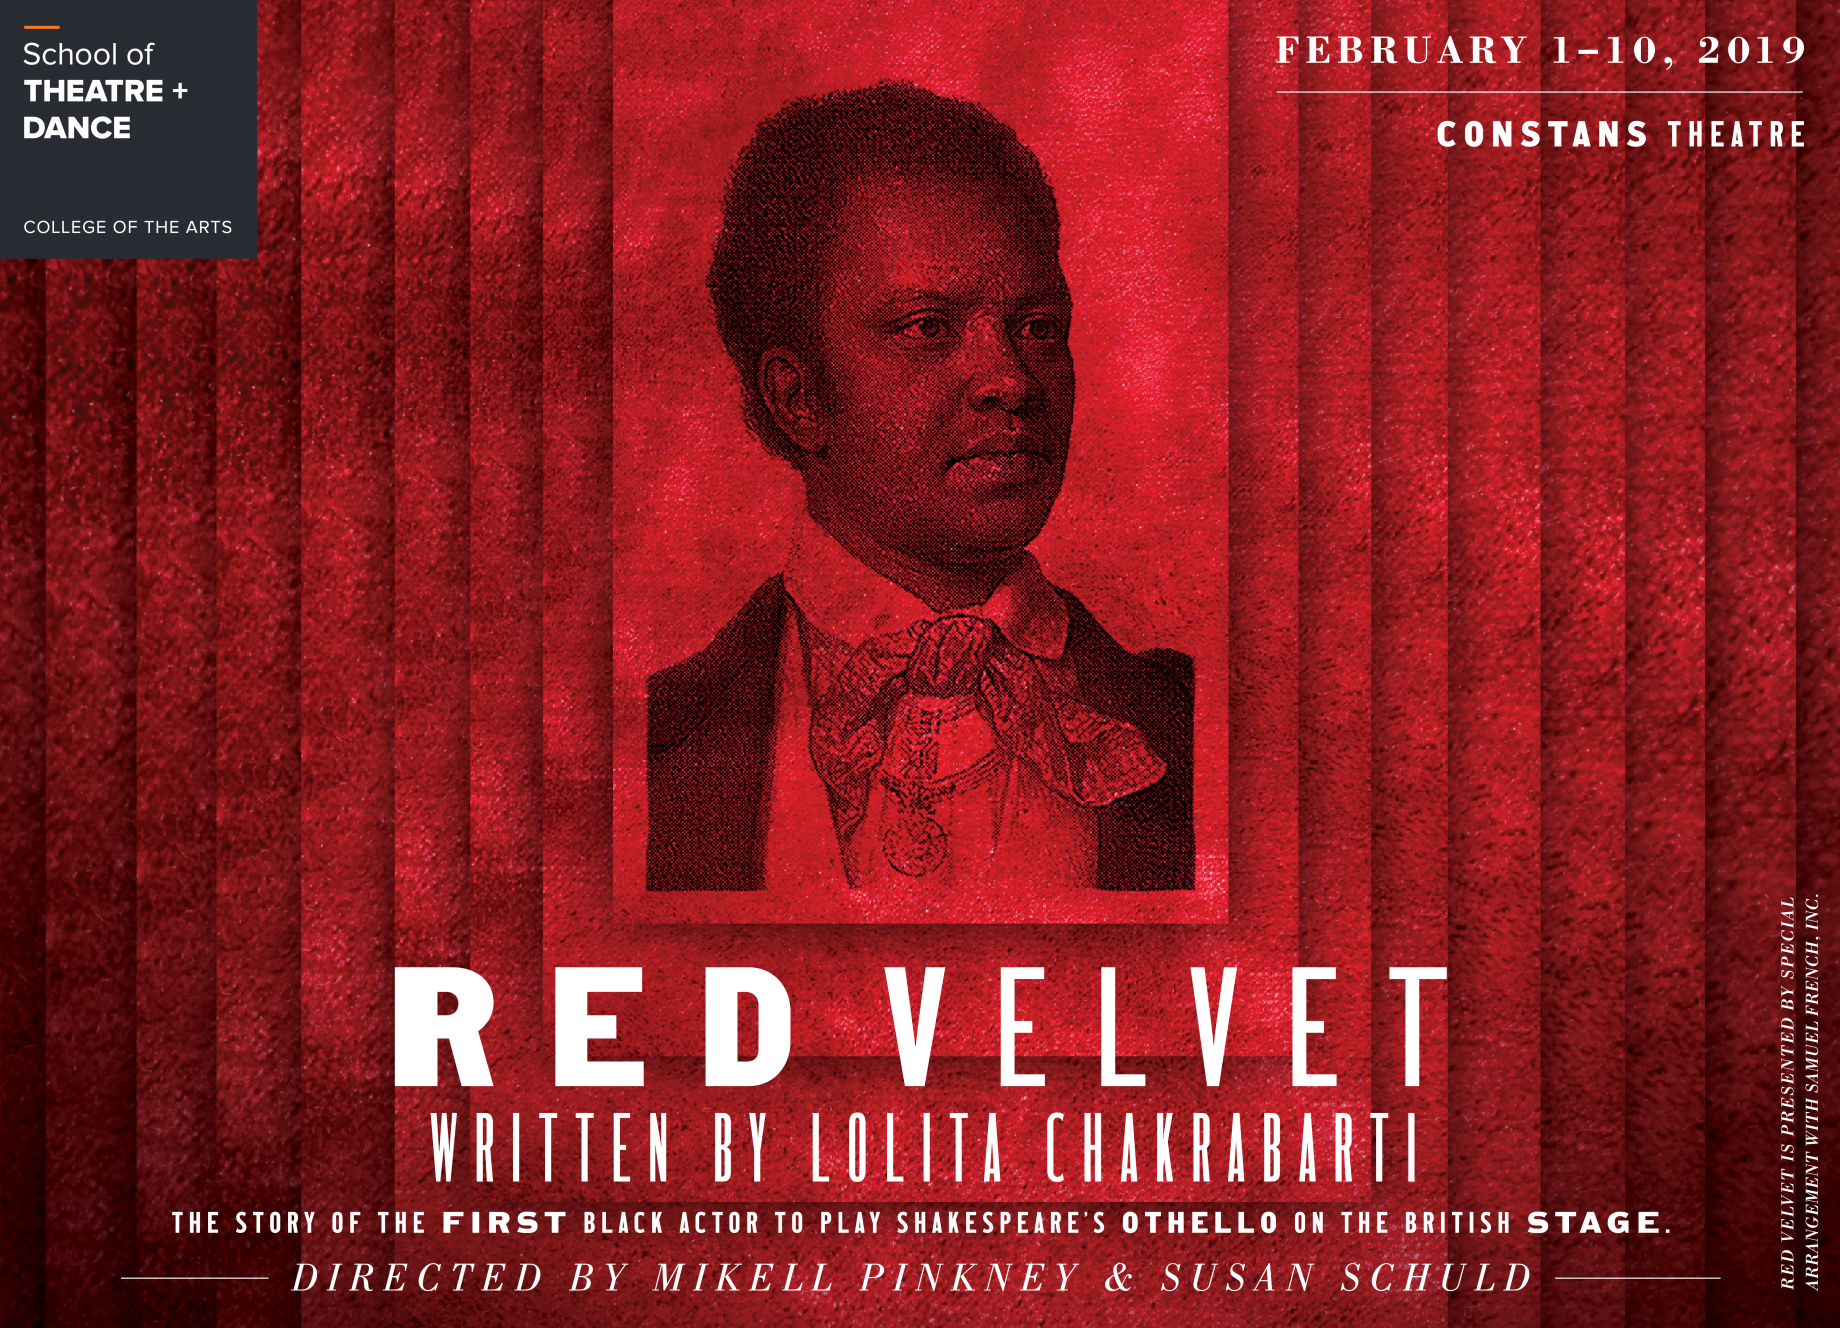 Red Velvet | Events | College of the Arts | University Florida